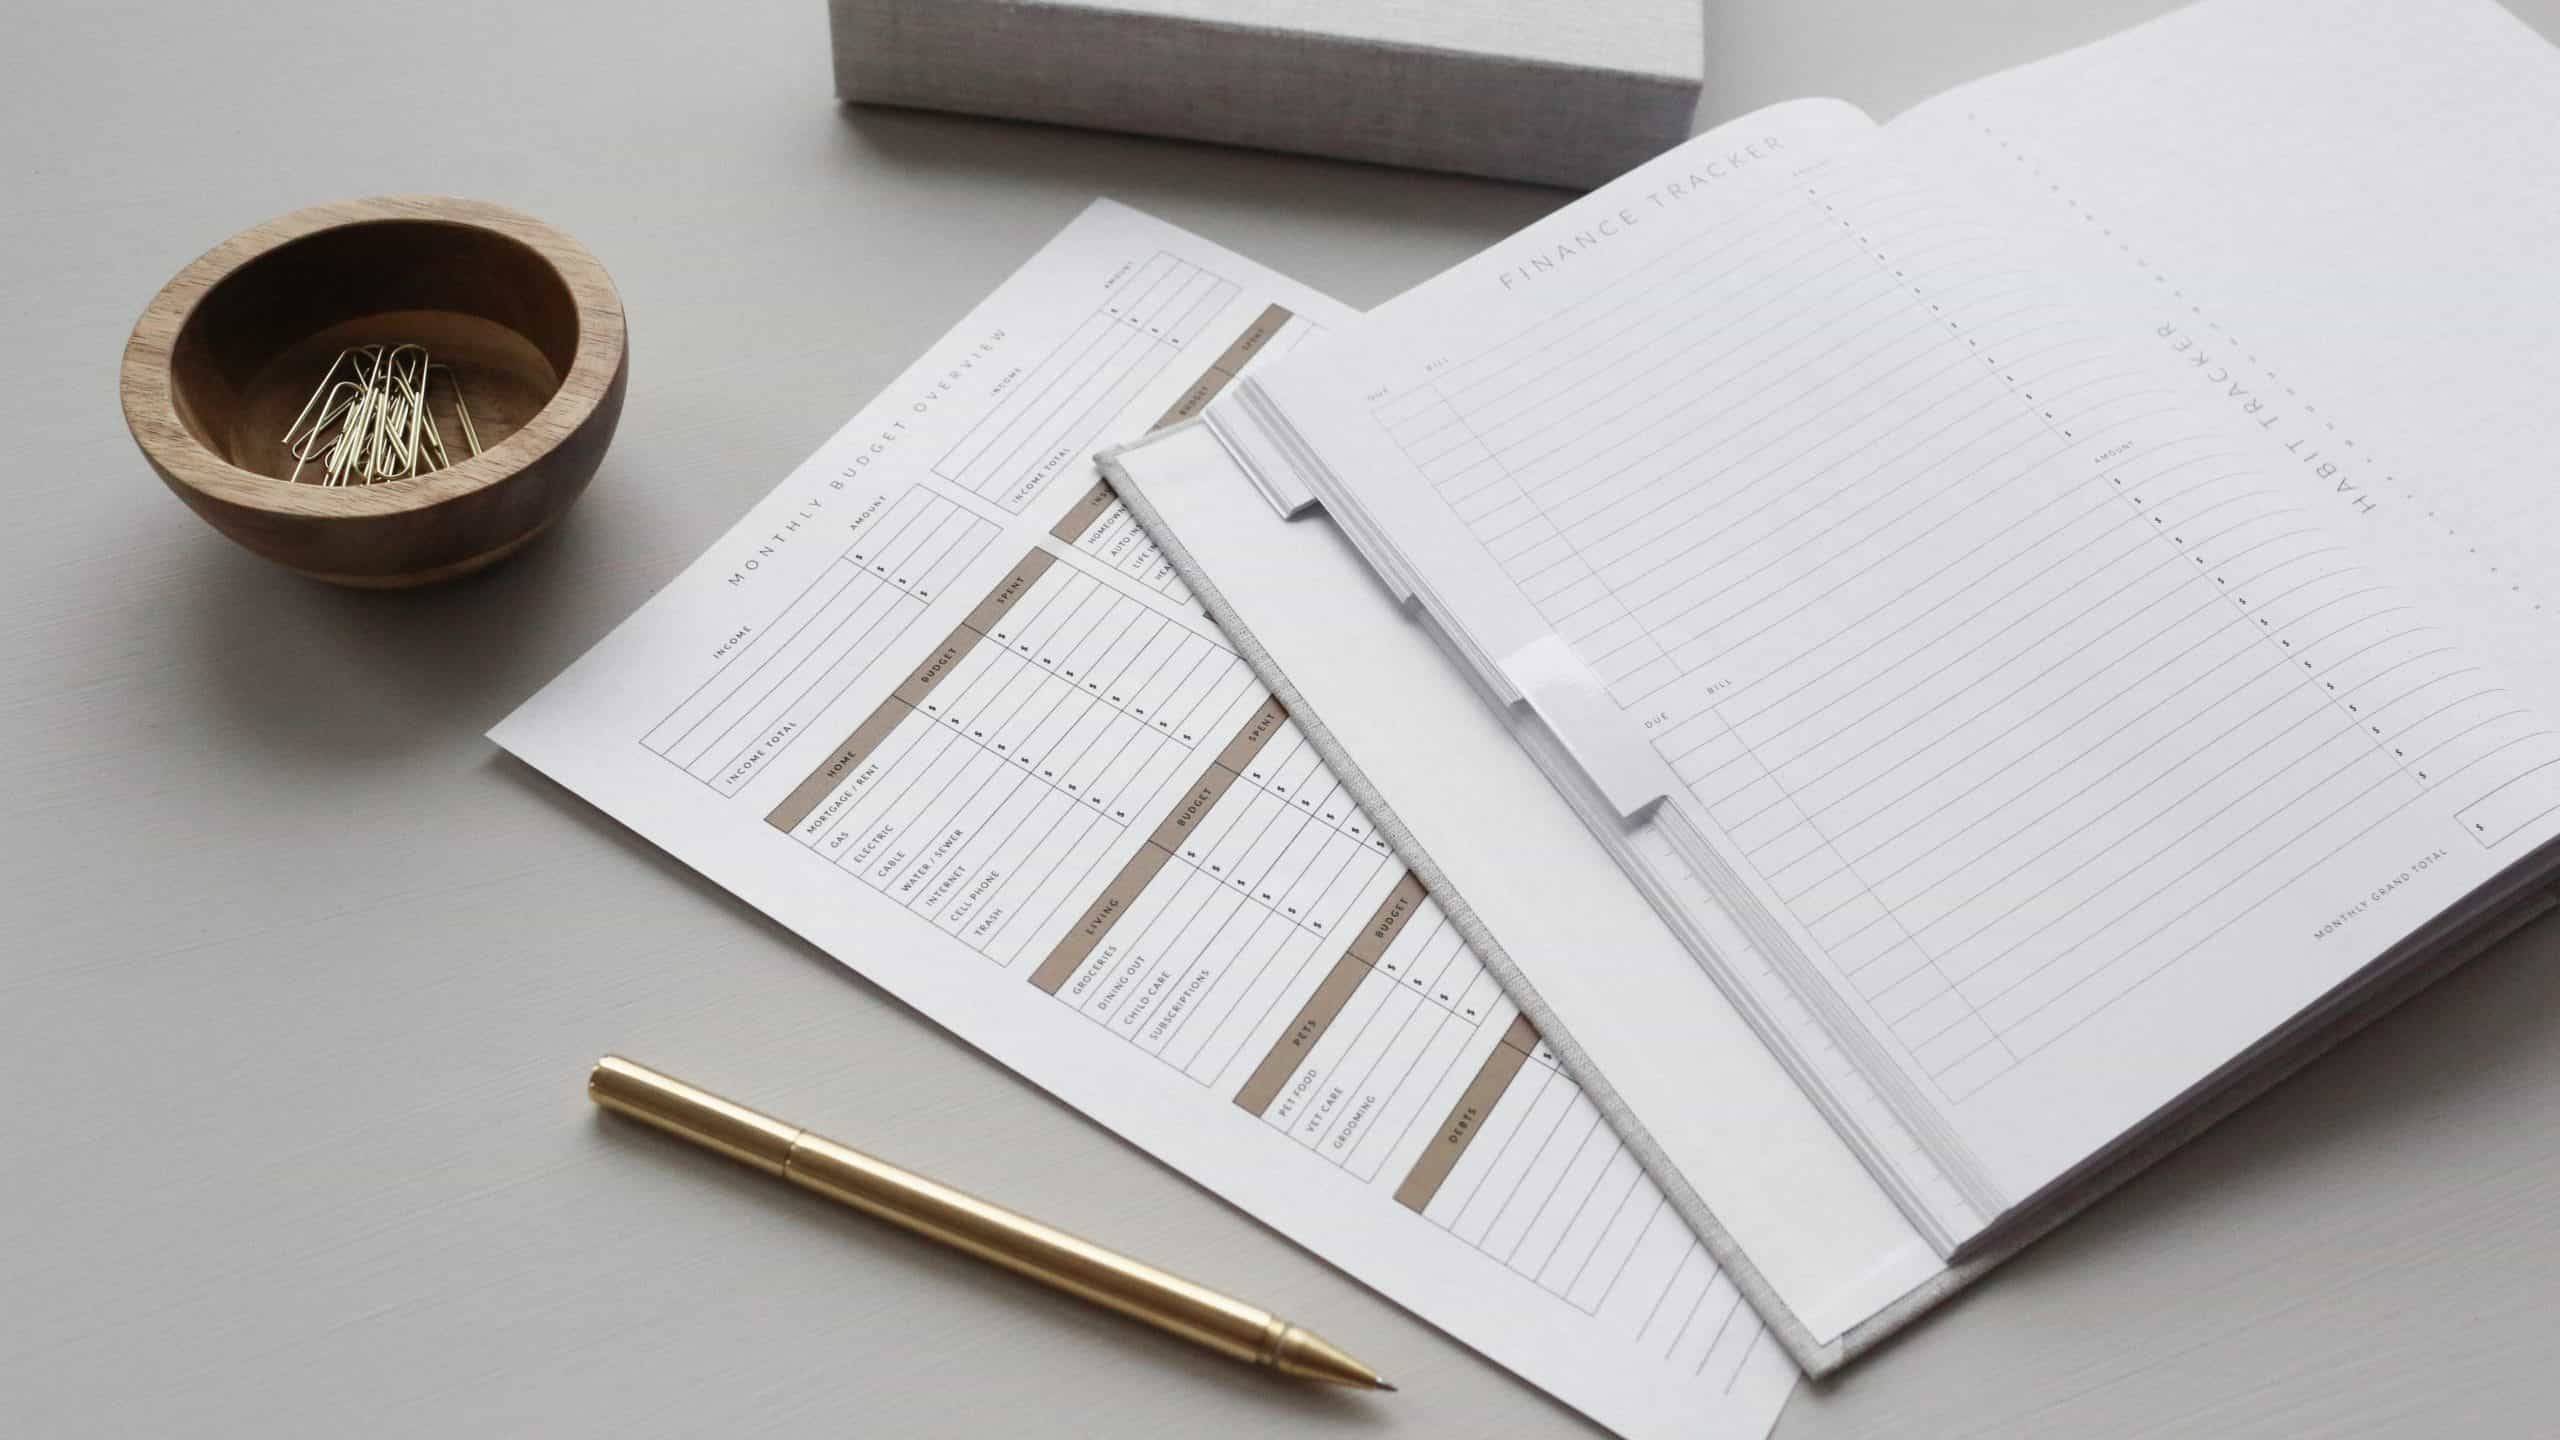 A neatly organized workspace featuring an open planner, a collection of financial documents, a wooden bowl with paper clips, and a gold pen, all resting on a gray desk surface.